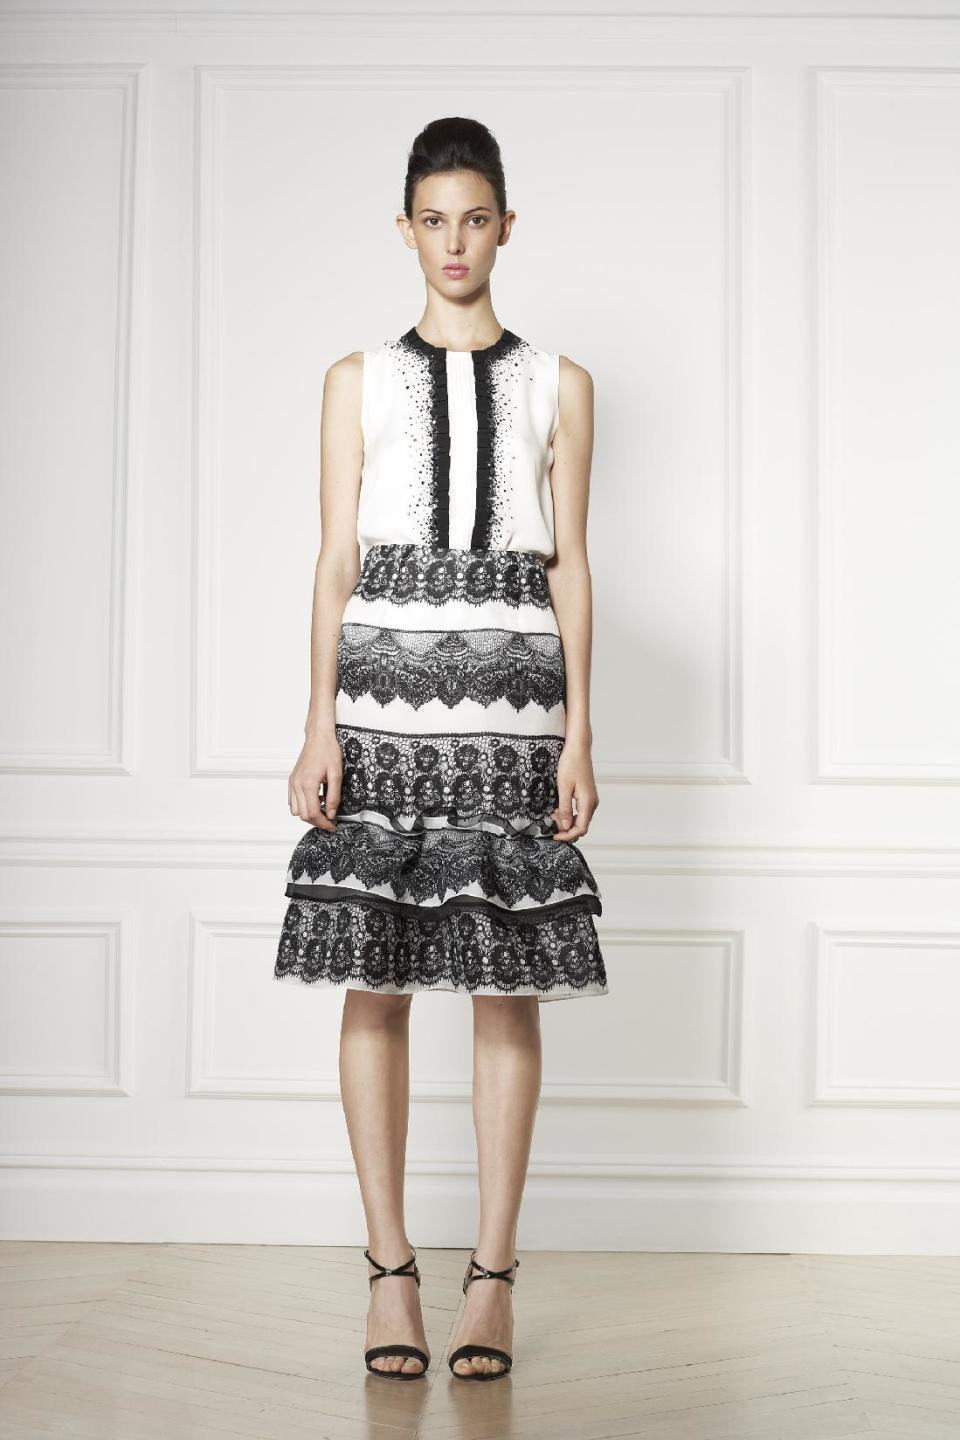 This undated image released by Carolina Herrera, a model wears a white tiered cocktail dress trimmed with black lace from the Carolina Herrera 2013 resort collection. (AP Photo/Carolina Herrera)